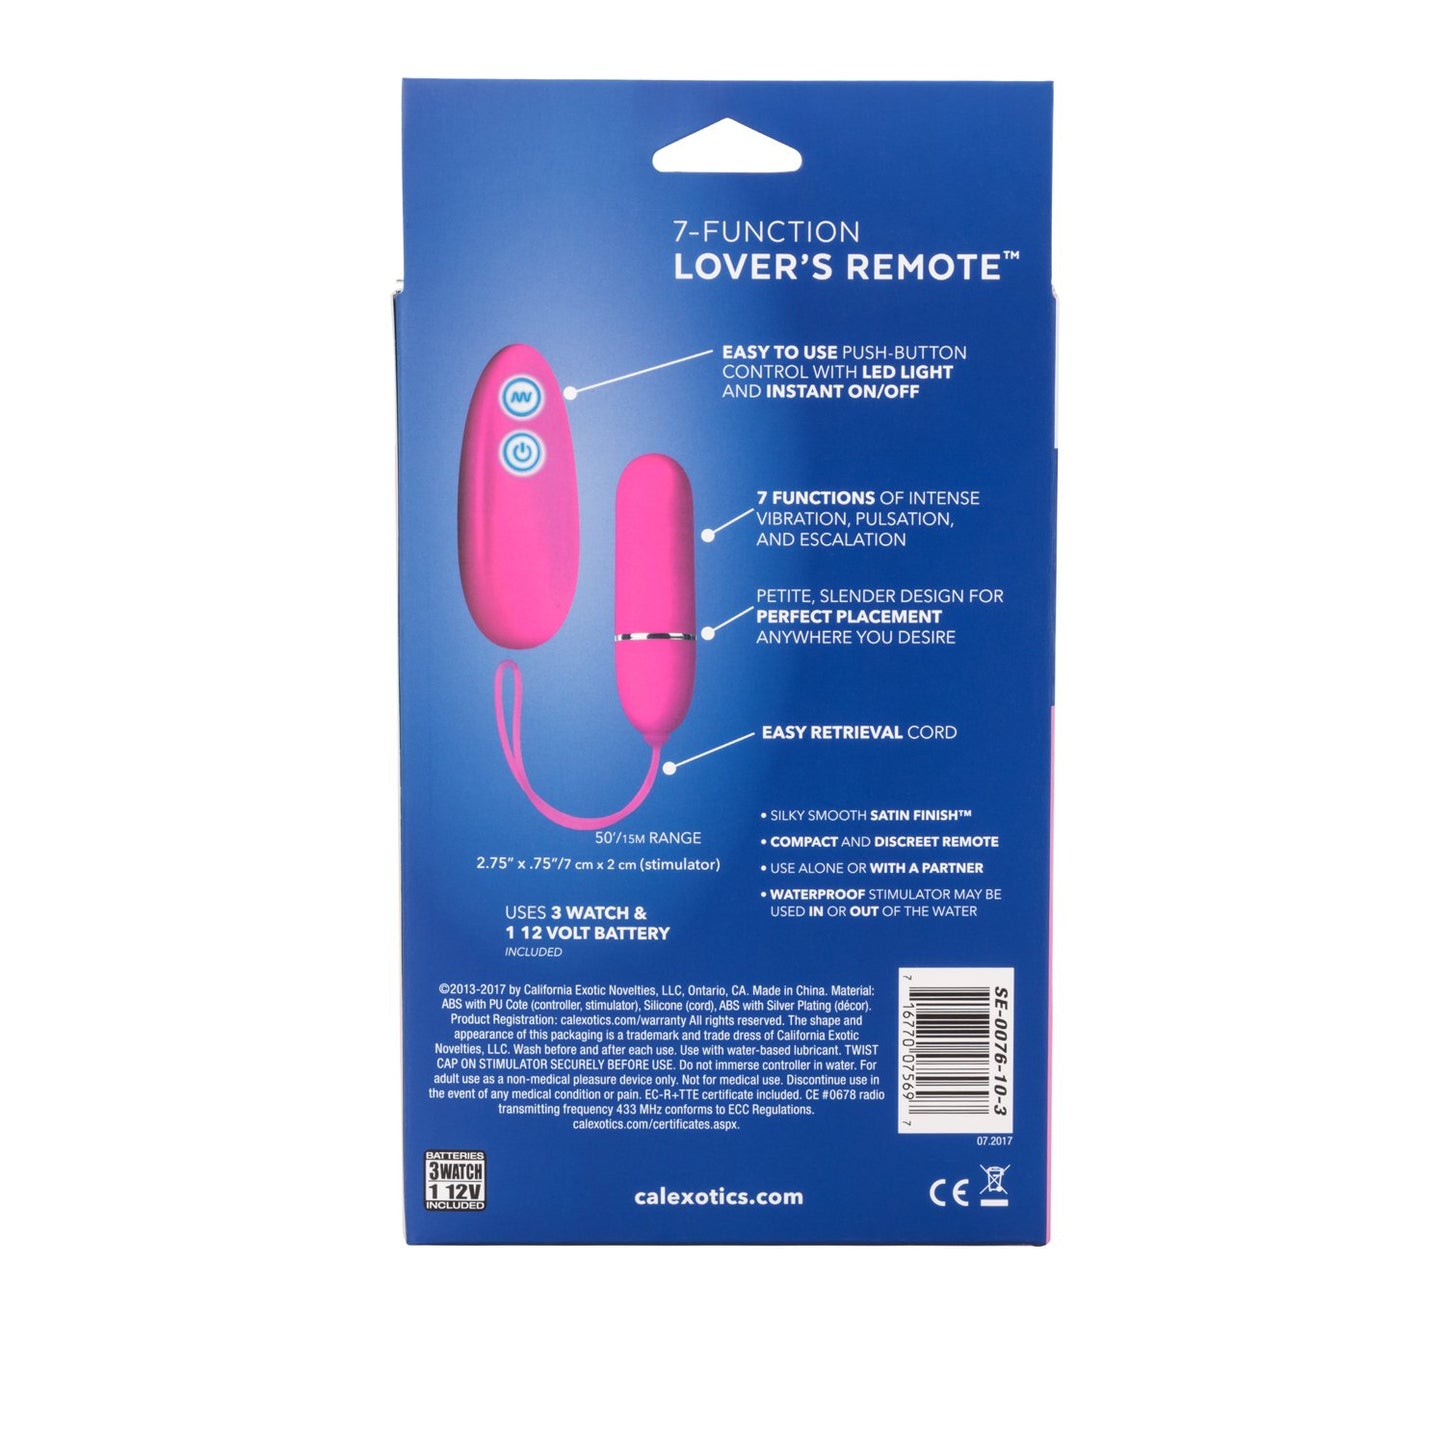 7-Function Lover's Remote